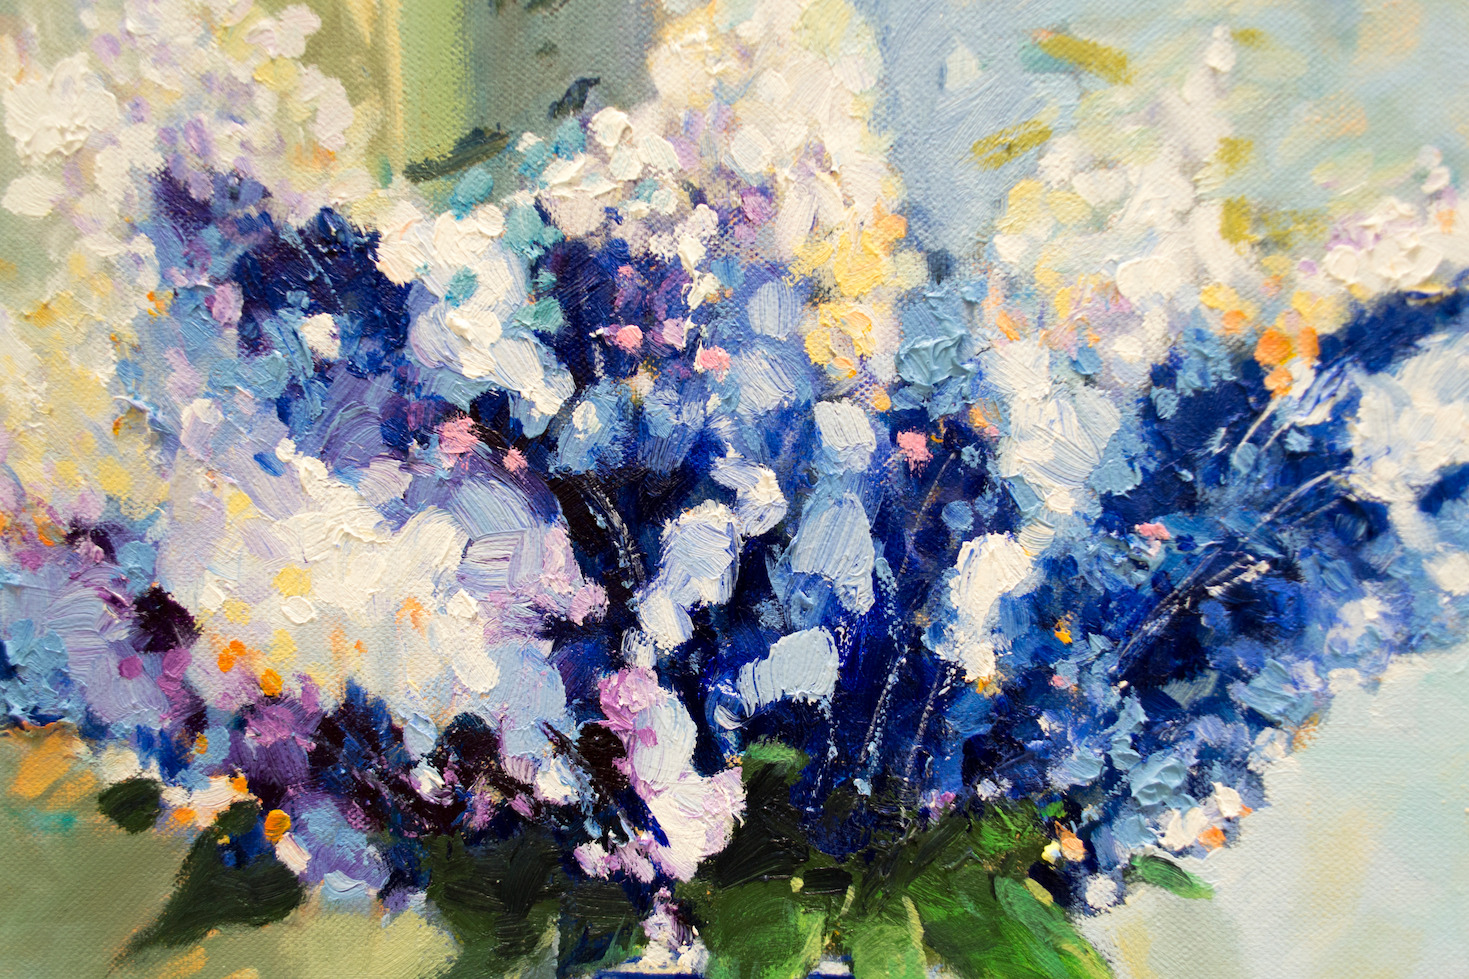 Close Up Detail Of Oil Painting "Whimsical Bouquet" By Judith Dalozzo